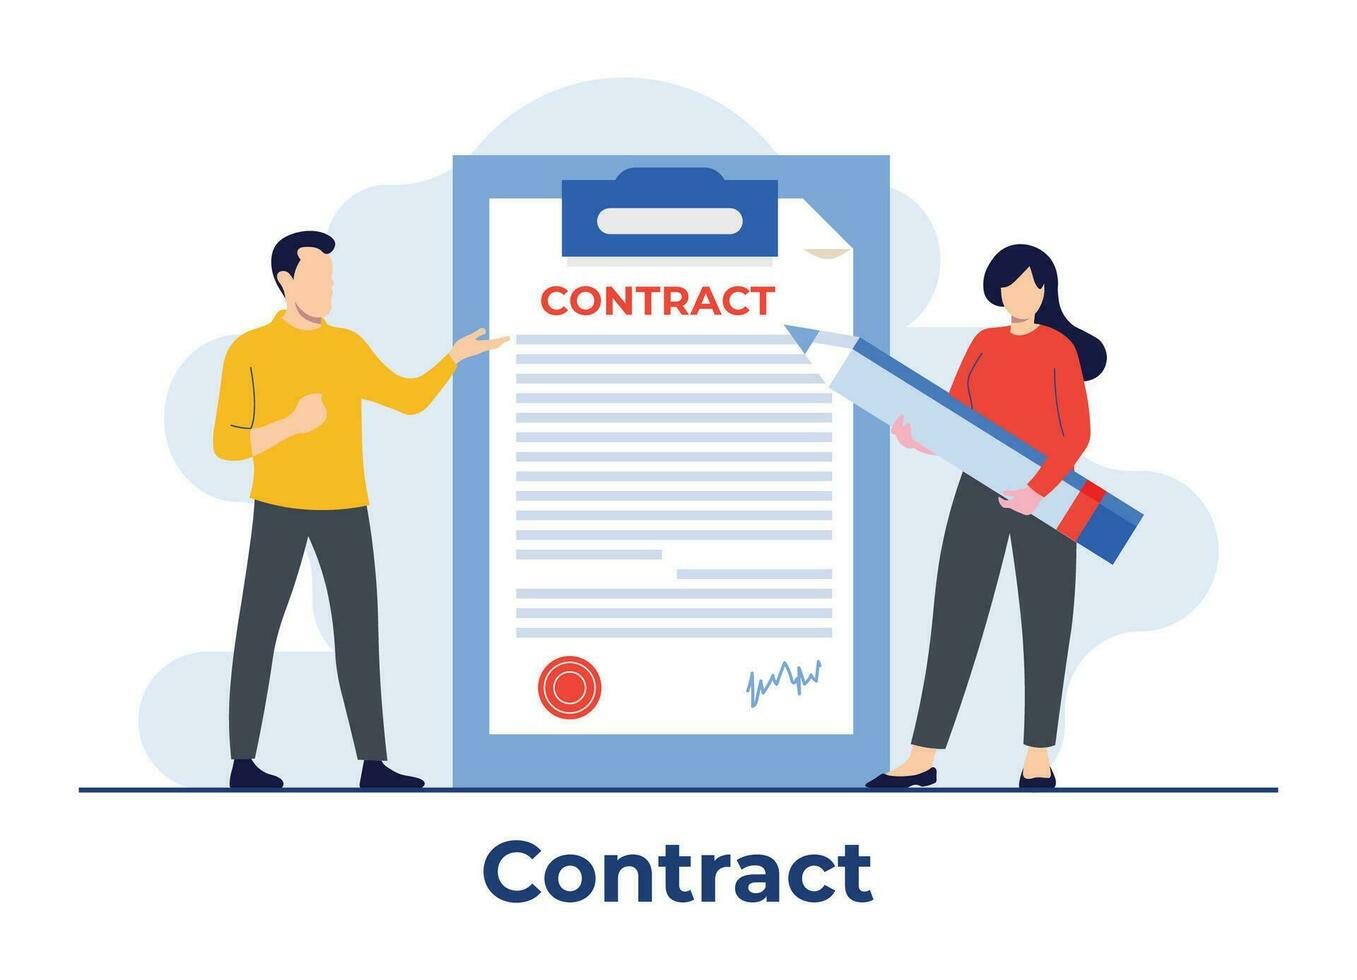 Signed paper deal contract flat illustration vector template, Agreement, document, People signing contracts, Making a business deal, Agreements document with signature and approval stamp